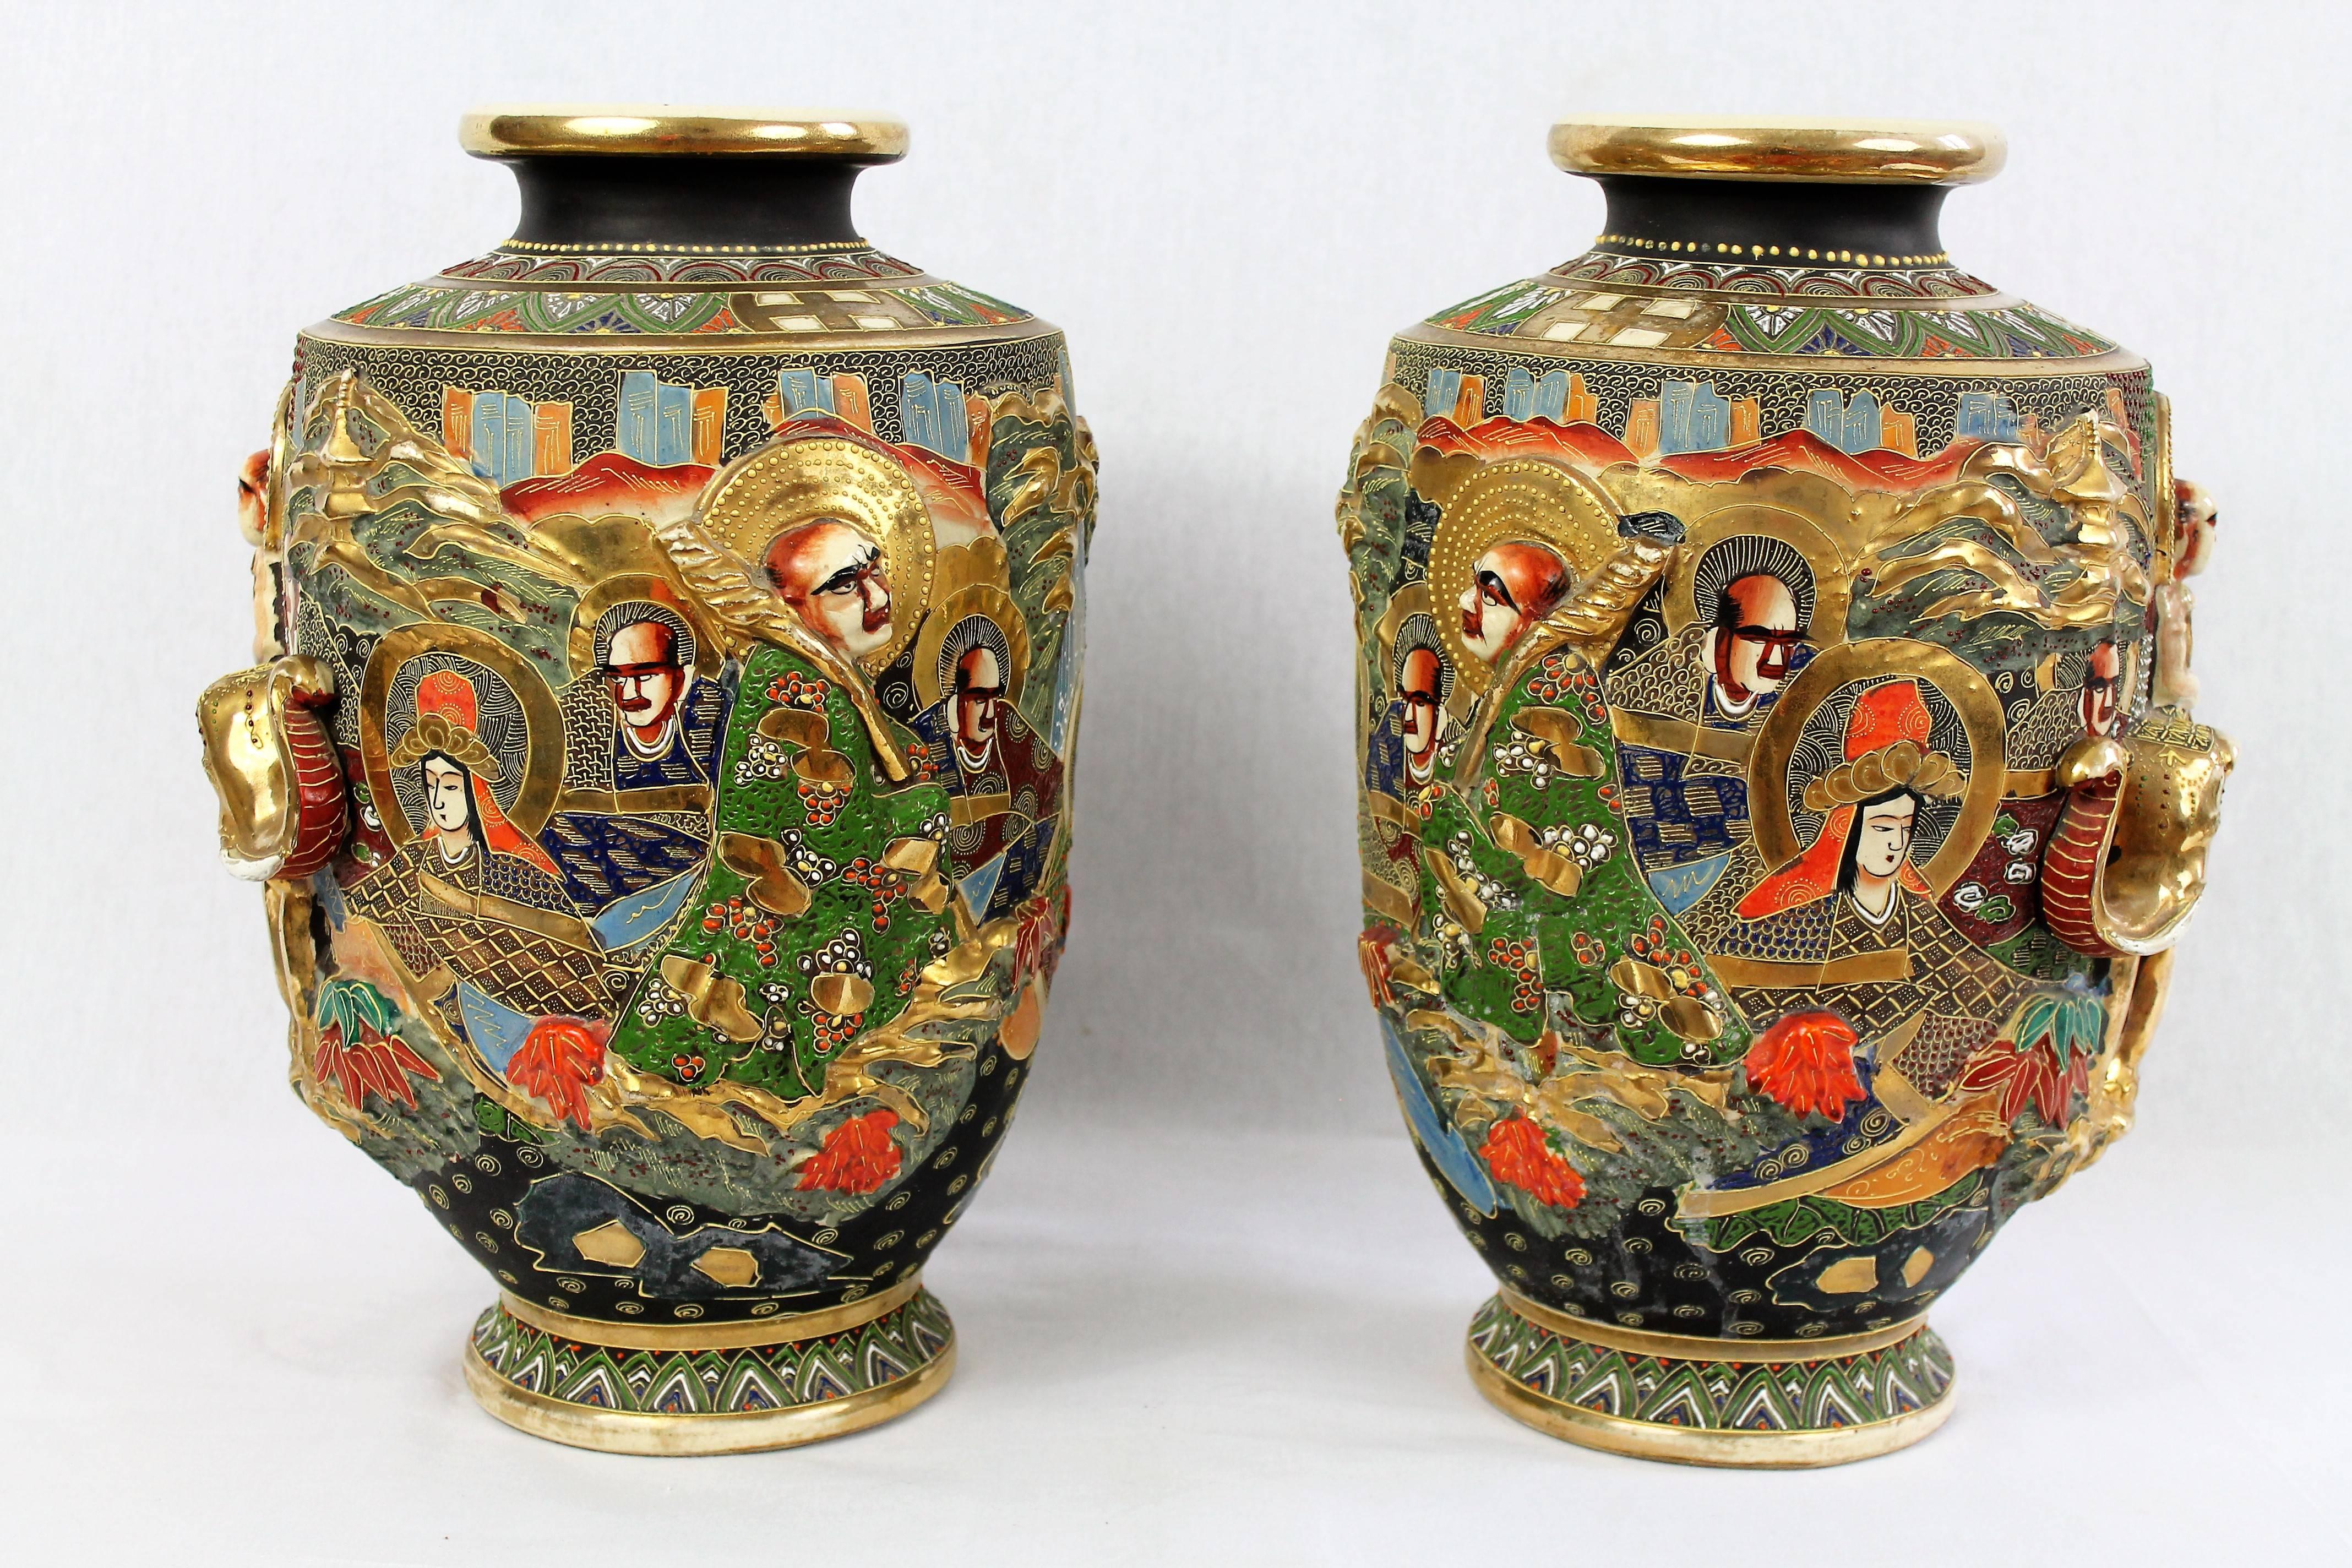 Large pair of Satsuma porcelain vases, decorated with three-dimensional deities. Very rich patterns, very beautiful colors and gilding.
Japan
Beginning of the 20th century.